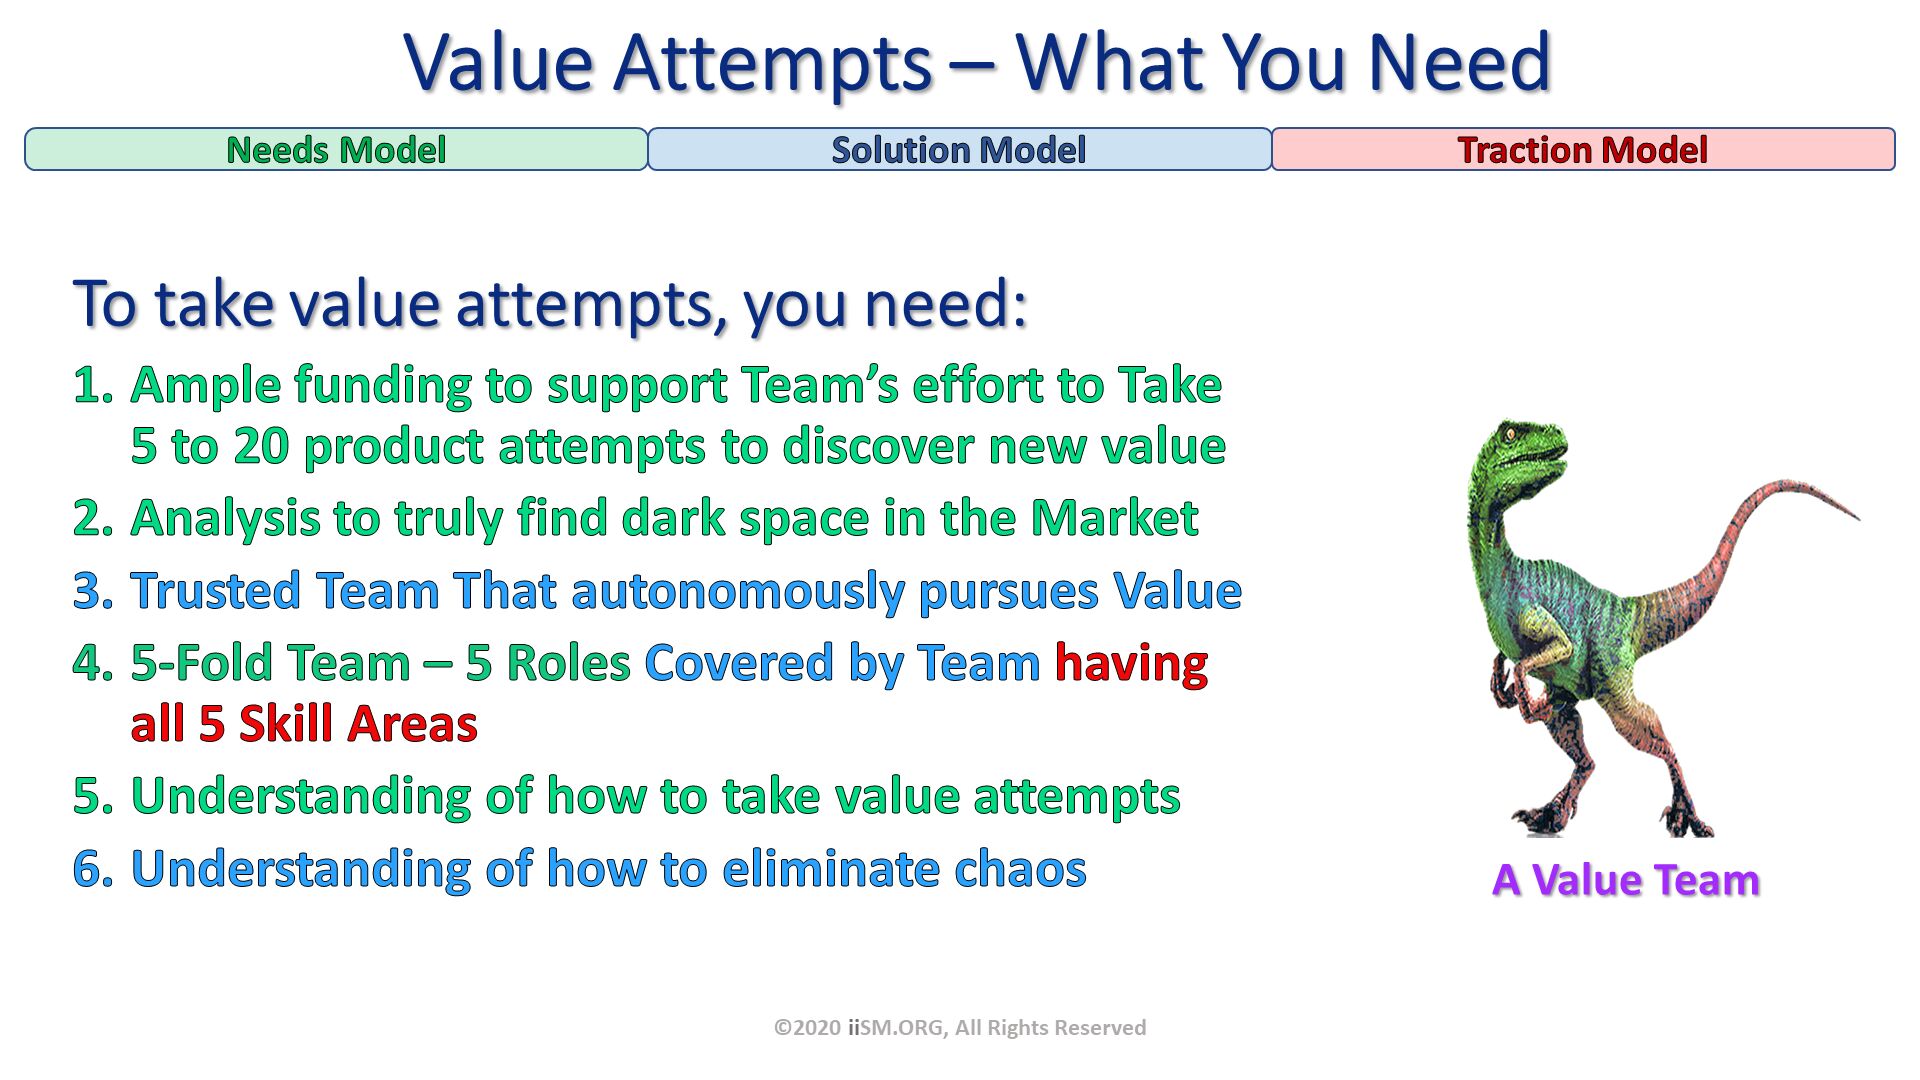 Value Attempts – What You Need. To take value attempts, you need:
Ample funding to support Team’s effort to Take 5 to 20 product attempts to discover new value
Analysis to truly find dark space in the Market 
Trusted Team That autonomously pursues Value
5-Fold Team – 5 Roles Covered by Team having all 5 Skill Areas
Understanding of how to take value attempts
Understanding of how to eliminate chaos
. ©2020 iiSM.ORG, All Rights Reserved. 